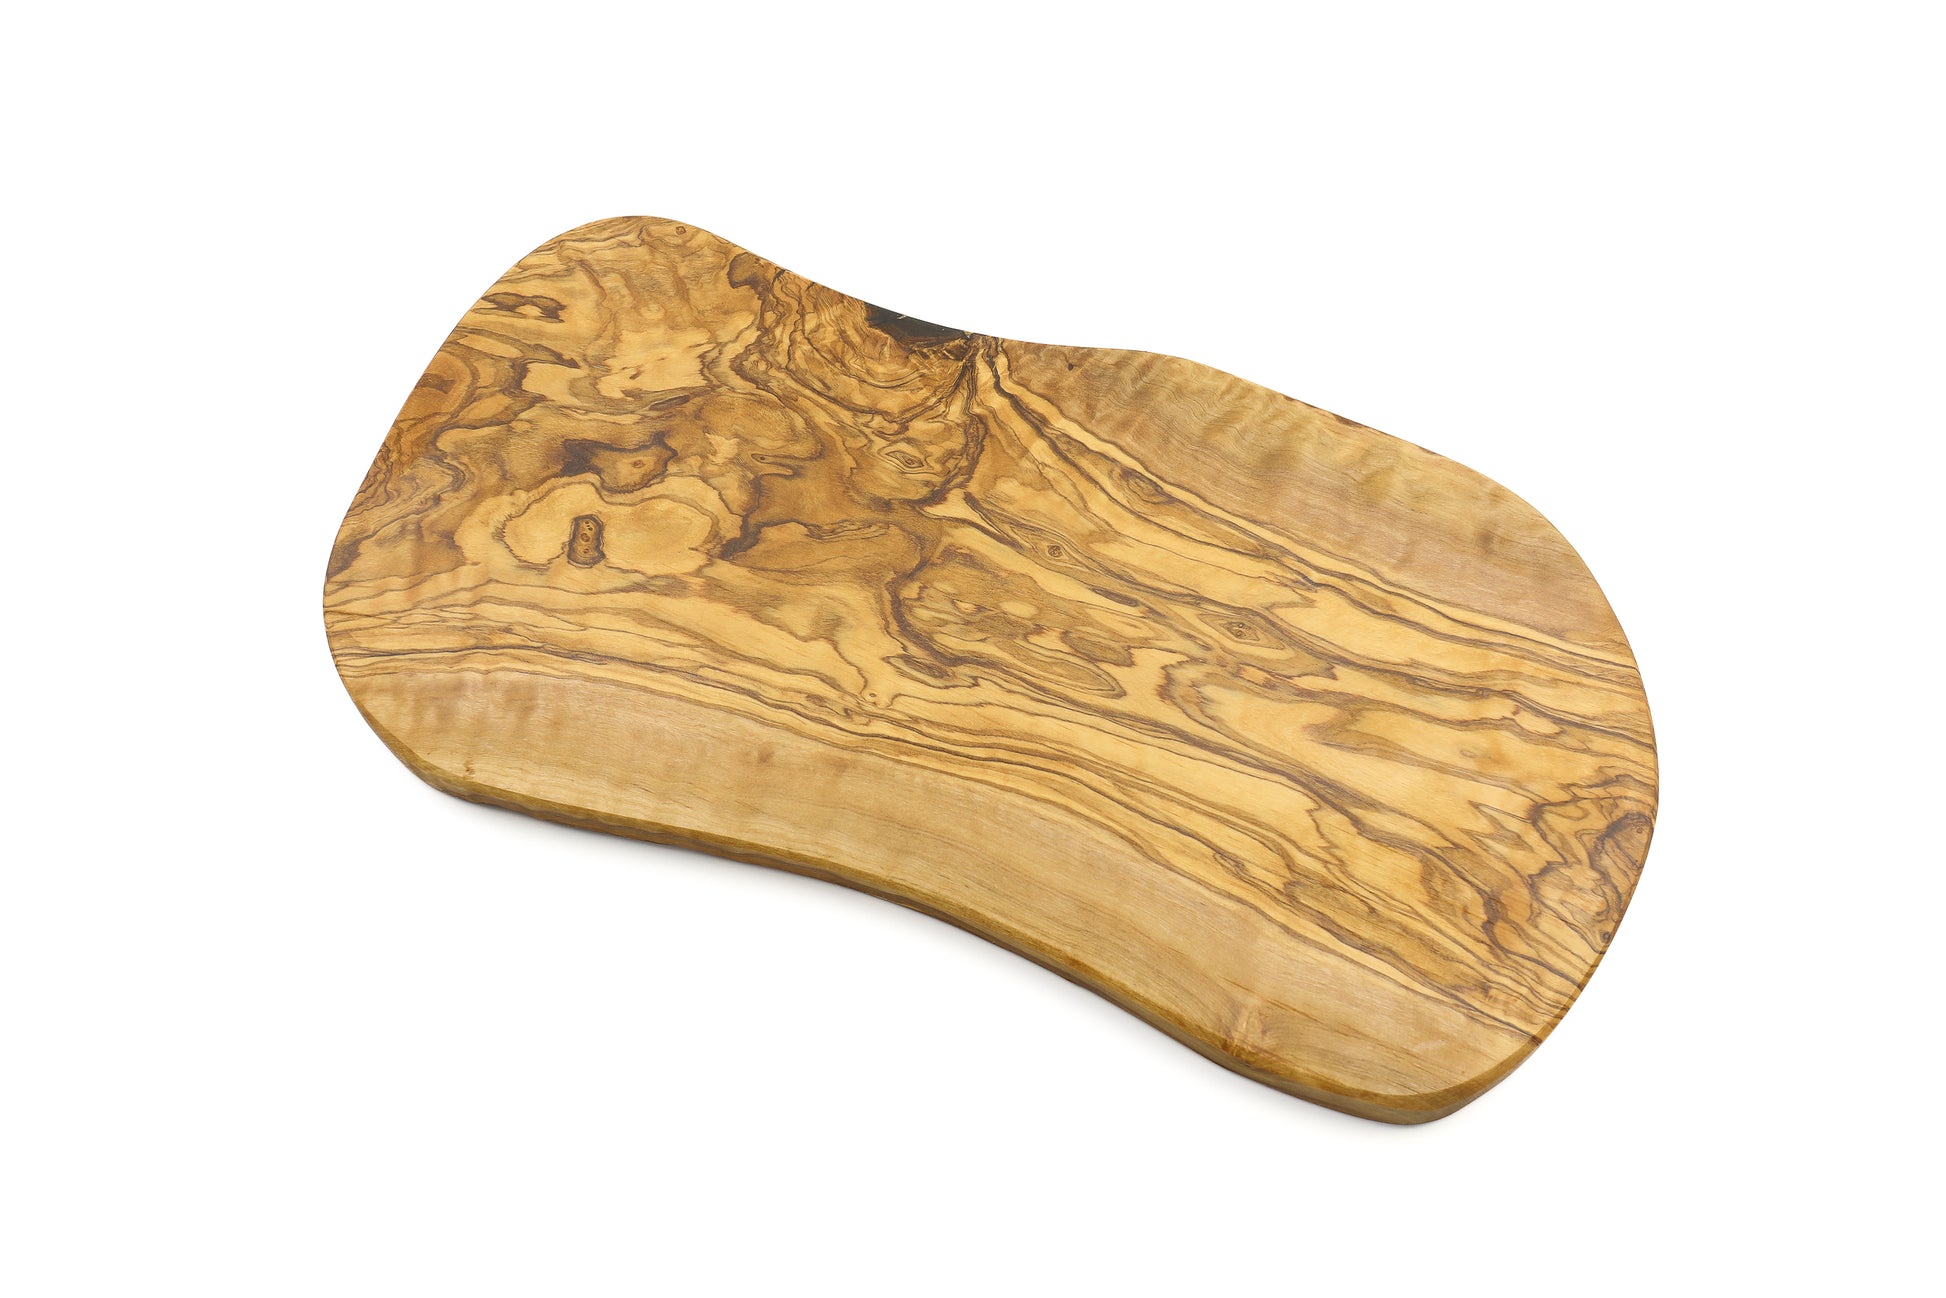 Olive wood cutting board with an irregular, natural shape for versatile use